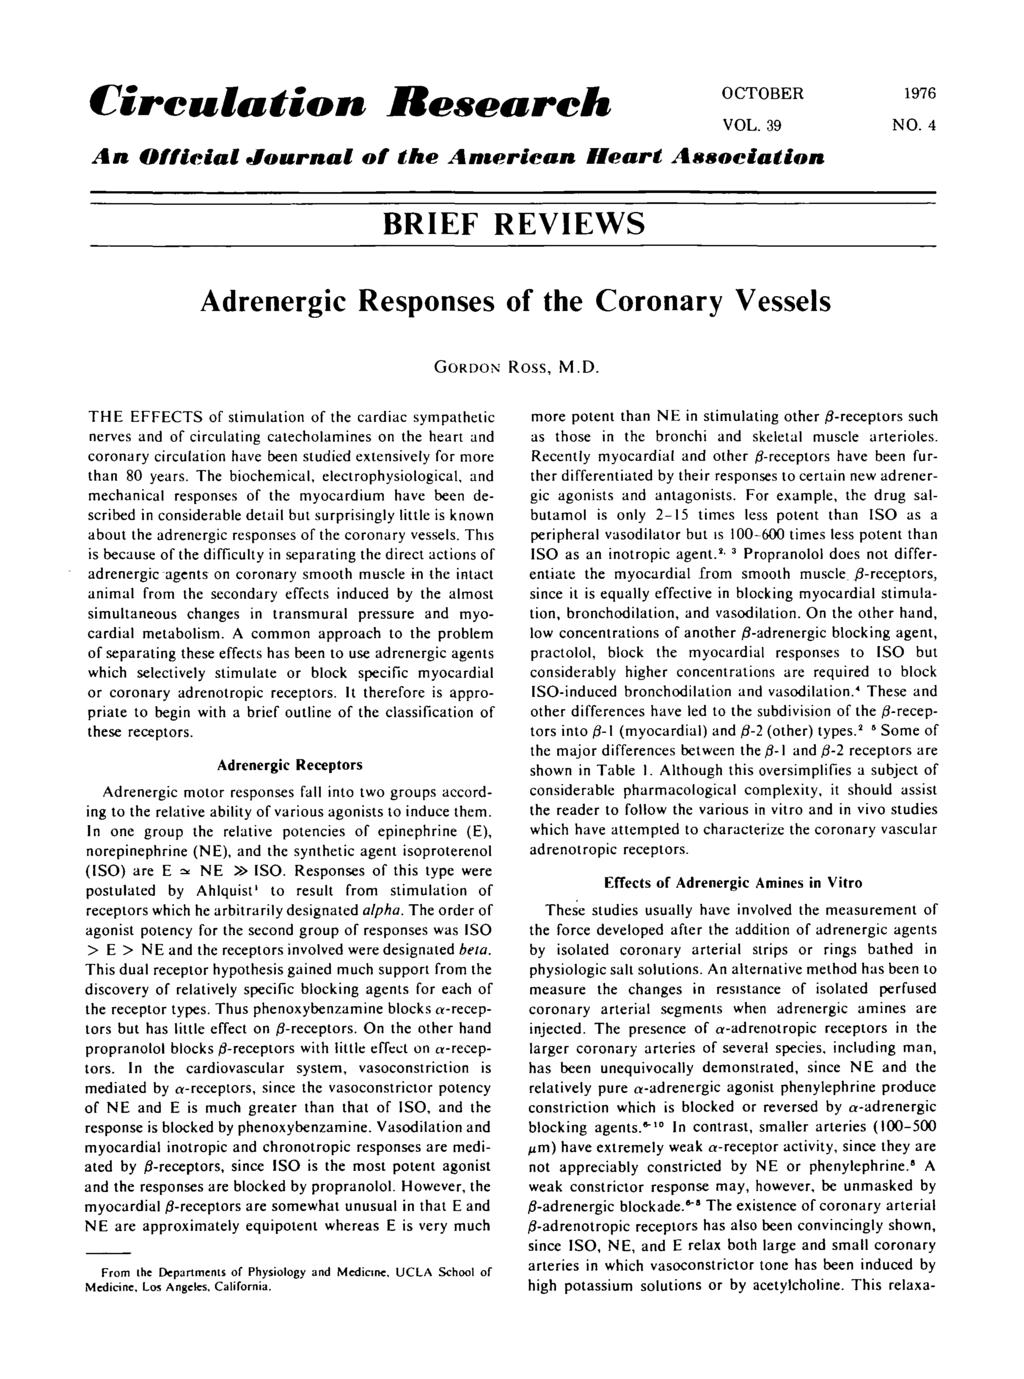 Circulation Research An Official Journal of the American Heart Association OCTOBER 1976 VOL. 39 NO. 4 BRIEF REVIEWS Adrenergic Responses of the Coronary Vessels GORDO